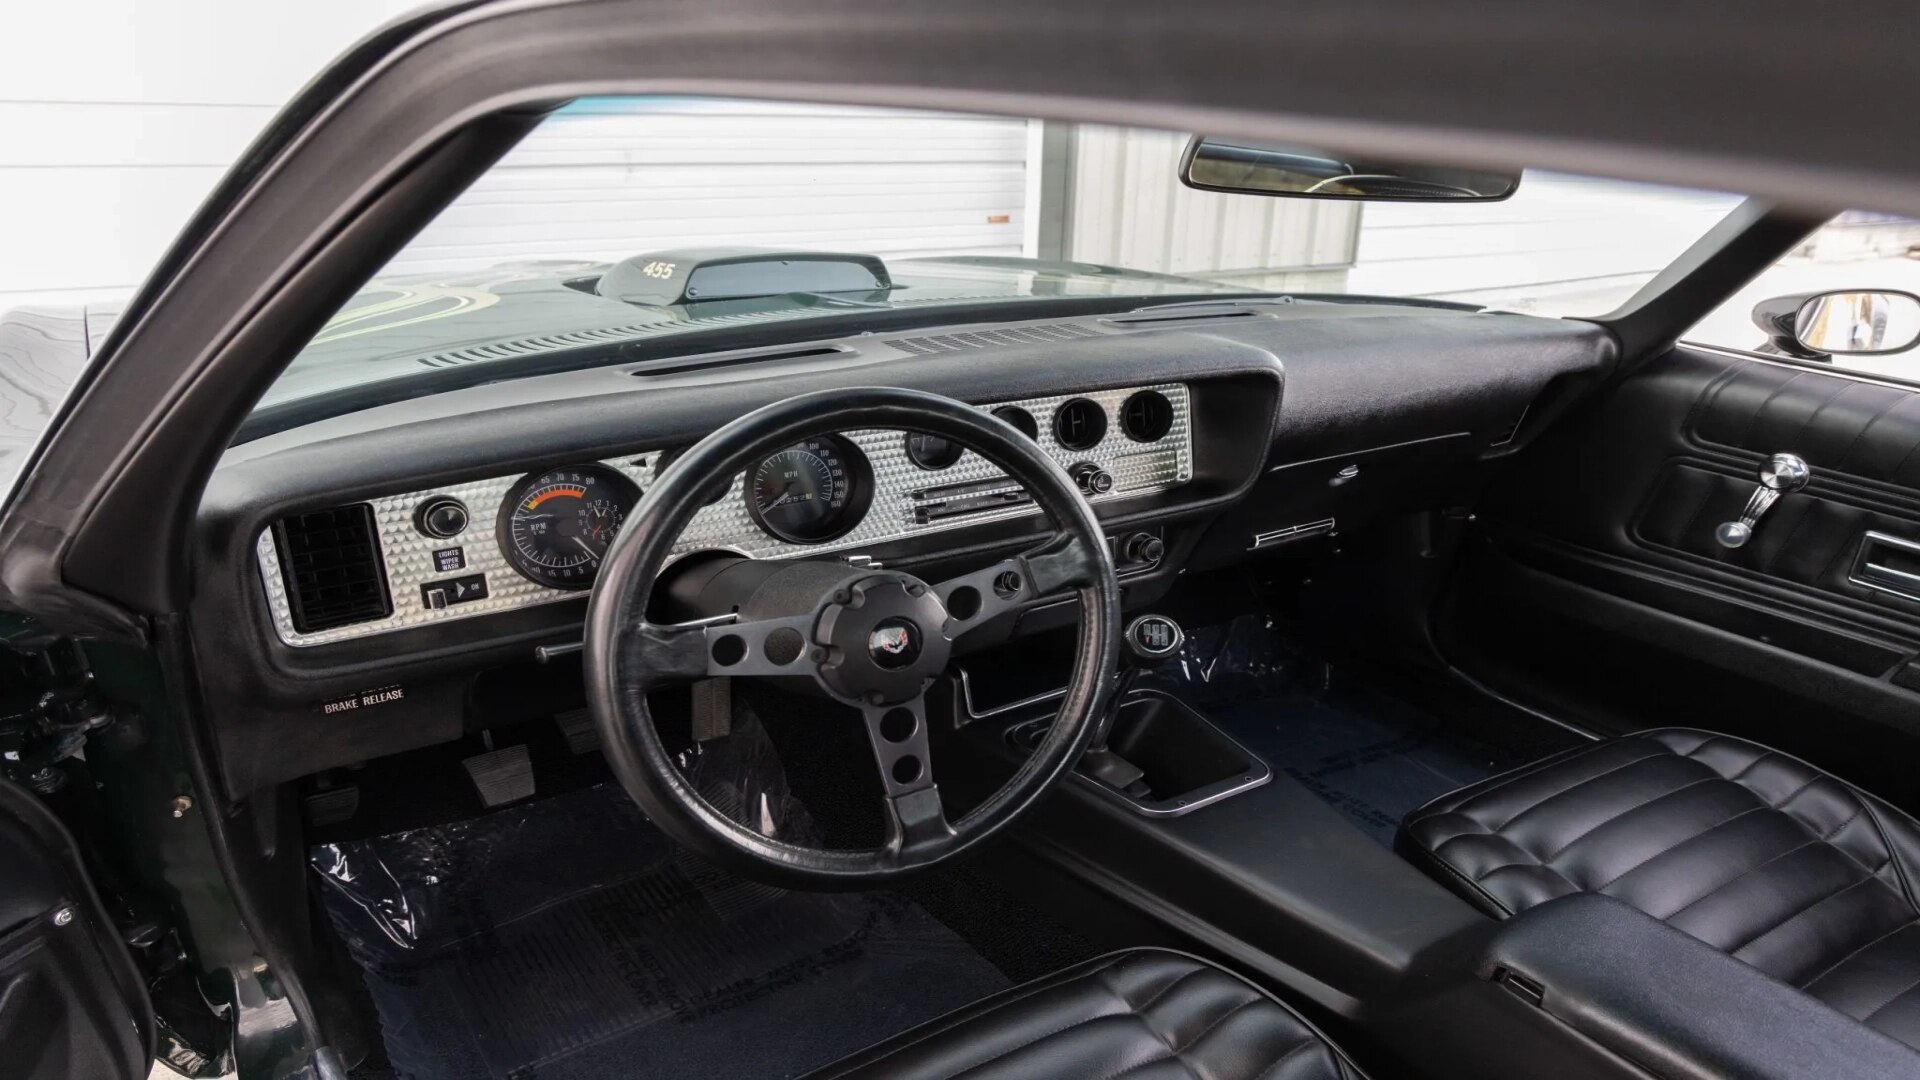 The Steering And Dashboard Of The 1973 Pontiac Firebird (Credits Bring A Trailer)